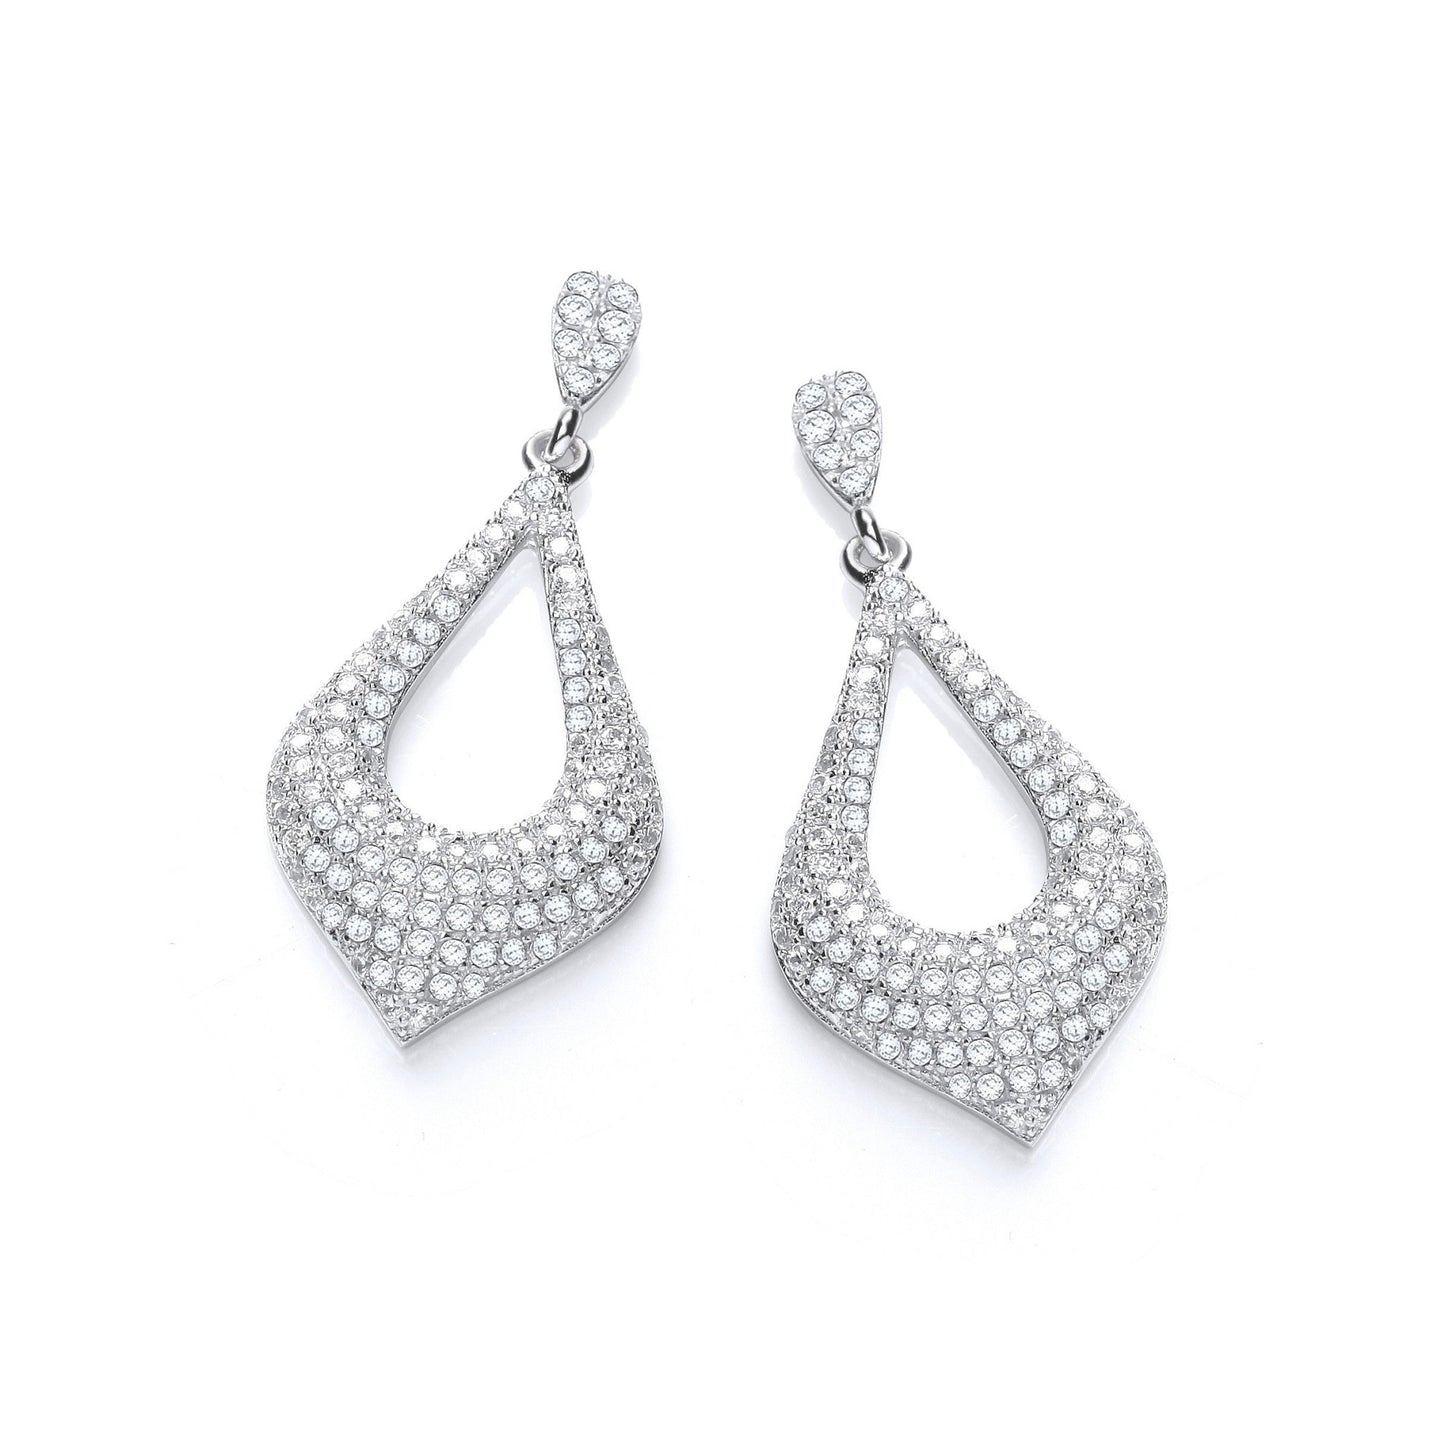 Puff Drop 925 Sterling Silver Earrings Set With CZs - FJewellery